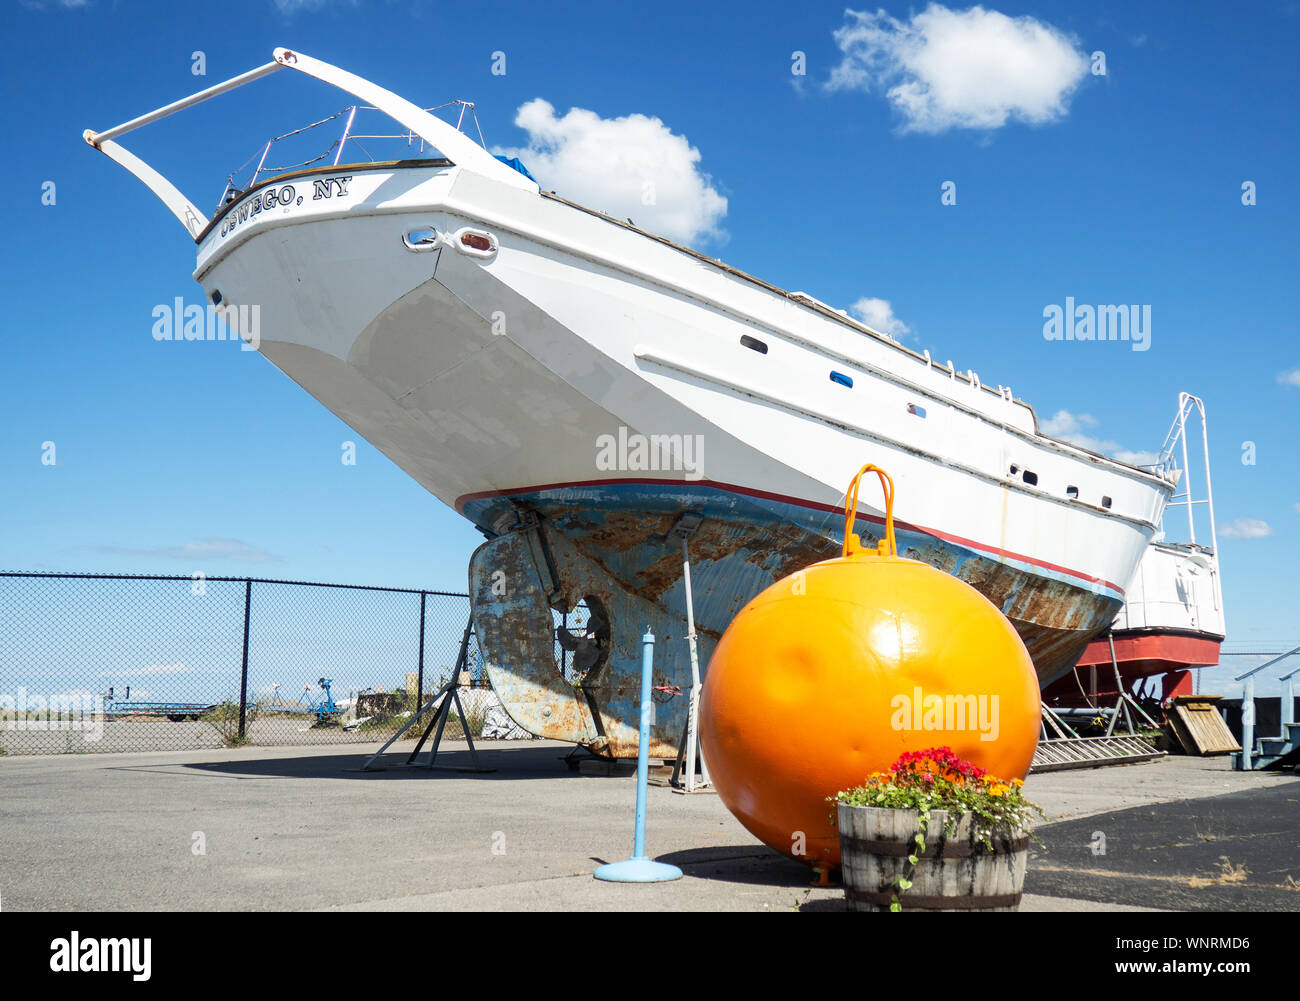 Oswego, New York, USA. September 6, 2019. Boat on display at the H. Lee White Maritime Museum in downtown Oswego on the shores of Lake Ontario Stock Photo